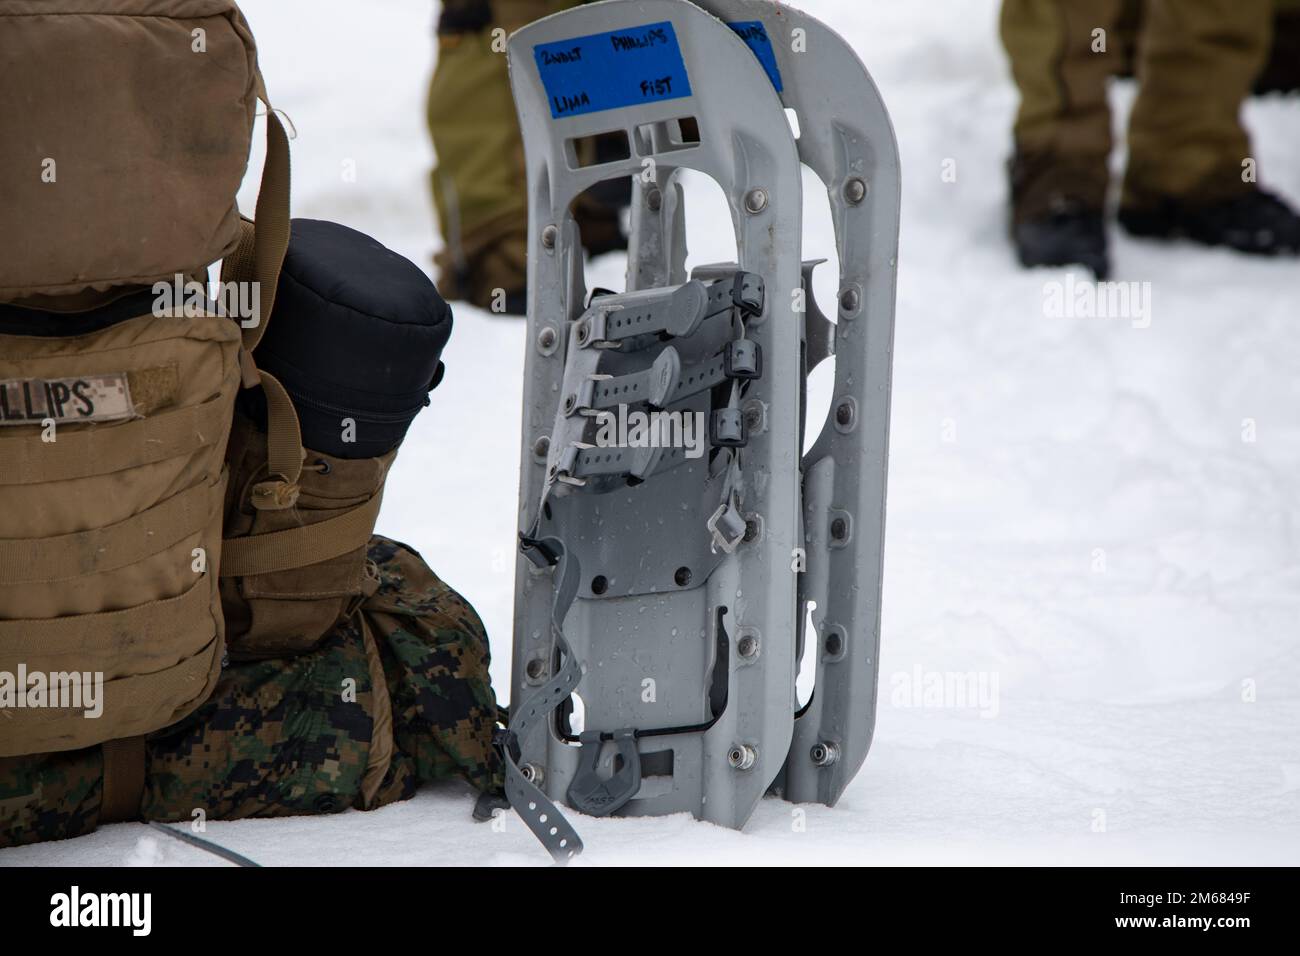 U.S. Marines with the 22nd Marine Expeditionary Unit, use Marine Corps modular snowshoes during cold weather training  in Setermoen, Norway, April 15, 2022. U.S. Marines and Sailors are training in Norway to strengthen relationships between NATO and allied forces. Stock Photo